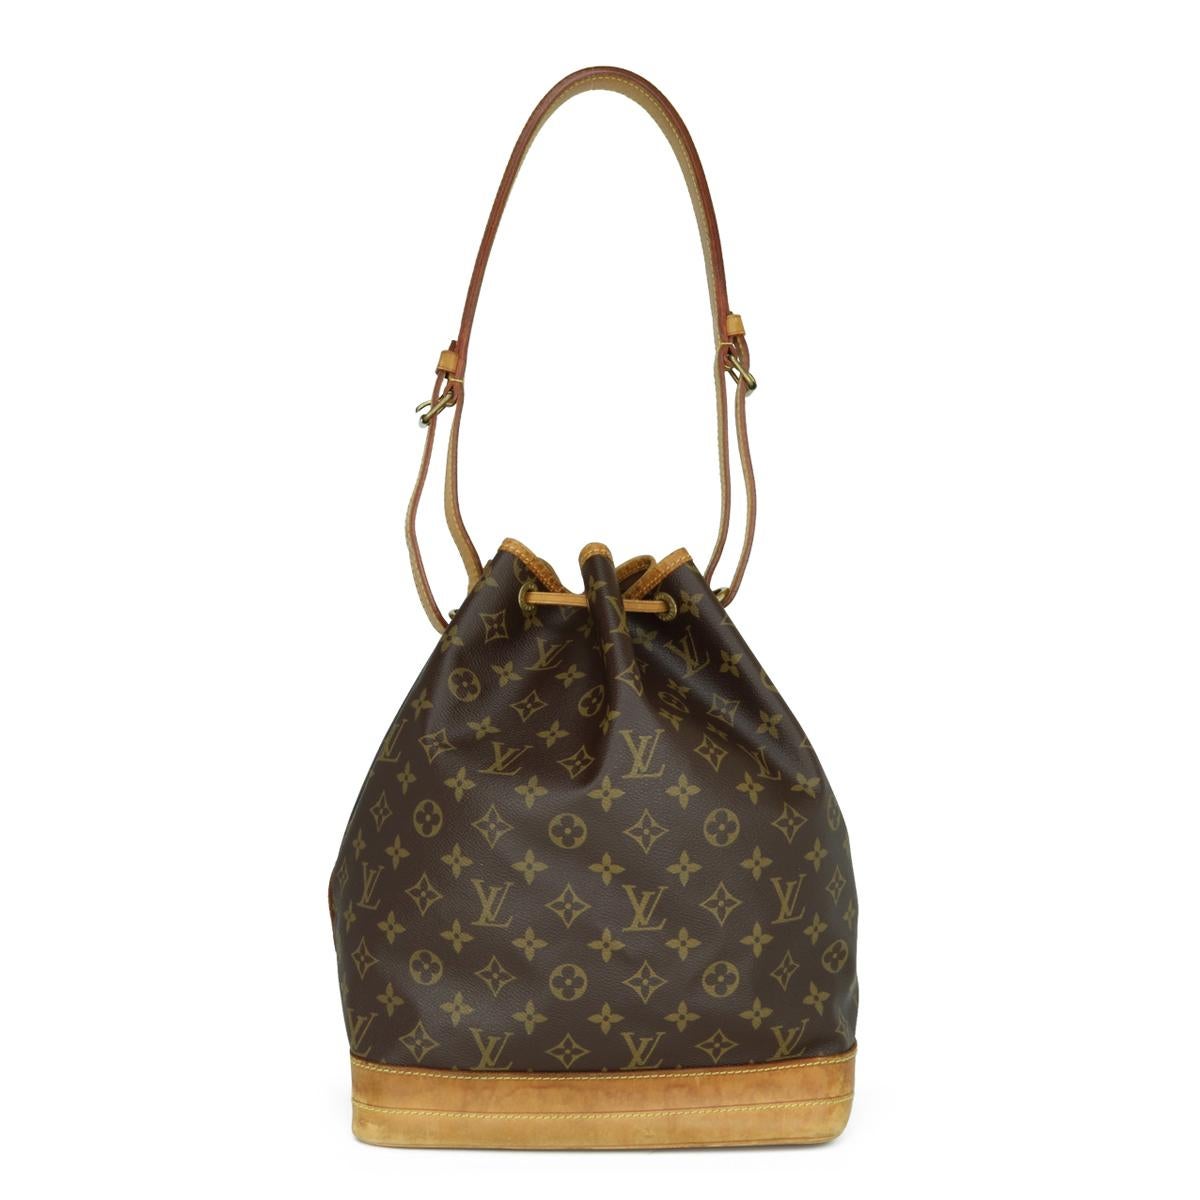 Louis Vuitton Noé Drawstring Bucket Bag in Monogram 2010.

This bag is in good condition. 

- Exterior Condition: Good condition. Light storage creasing to the canvas. The outside of the bag shows signs of wear - leather surface rubbing to four base